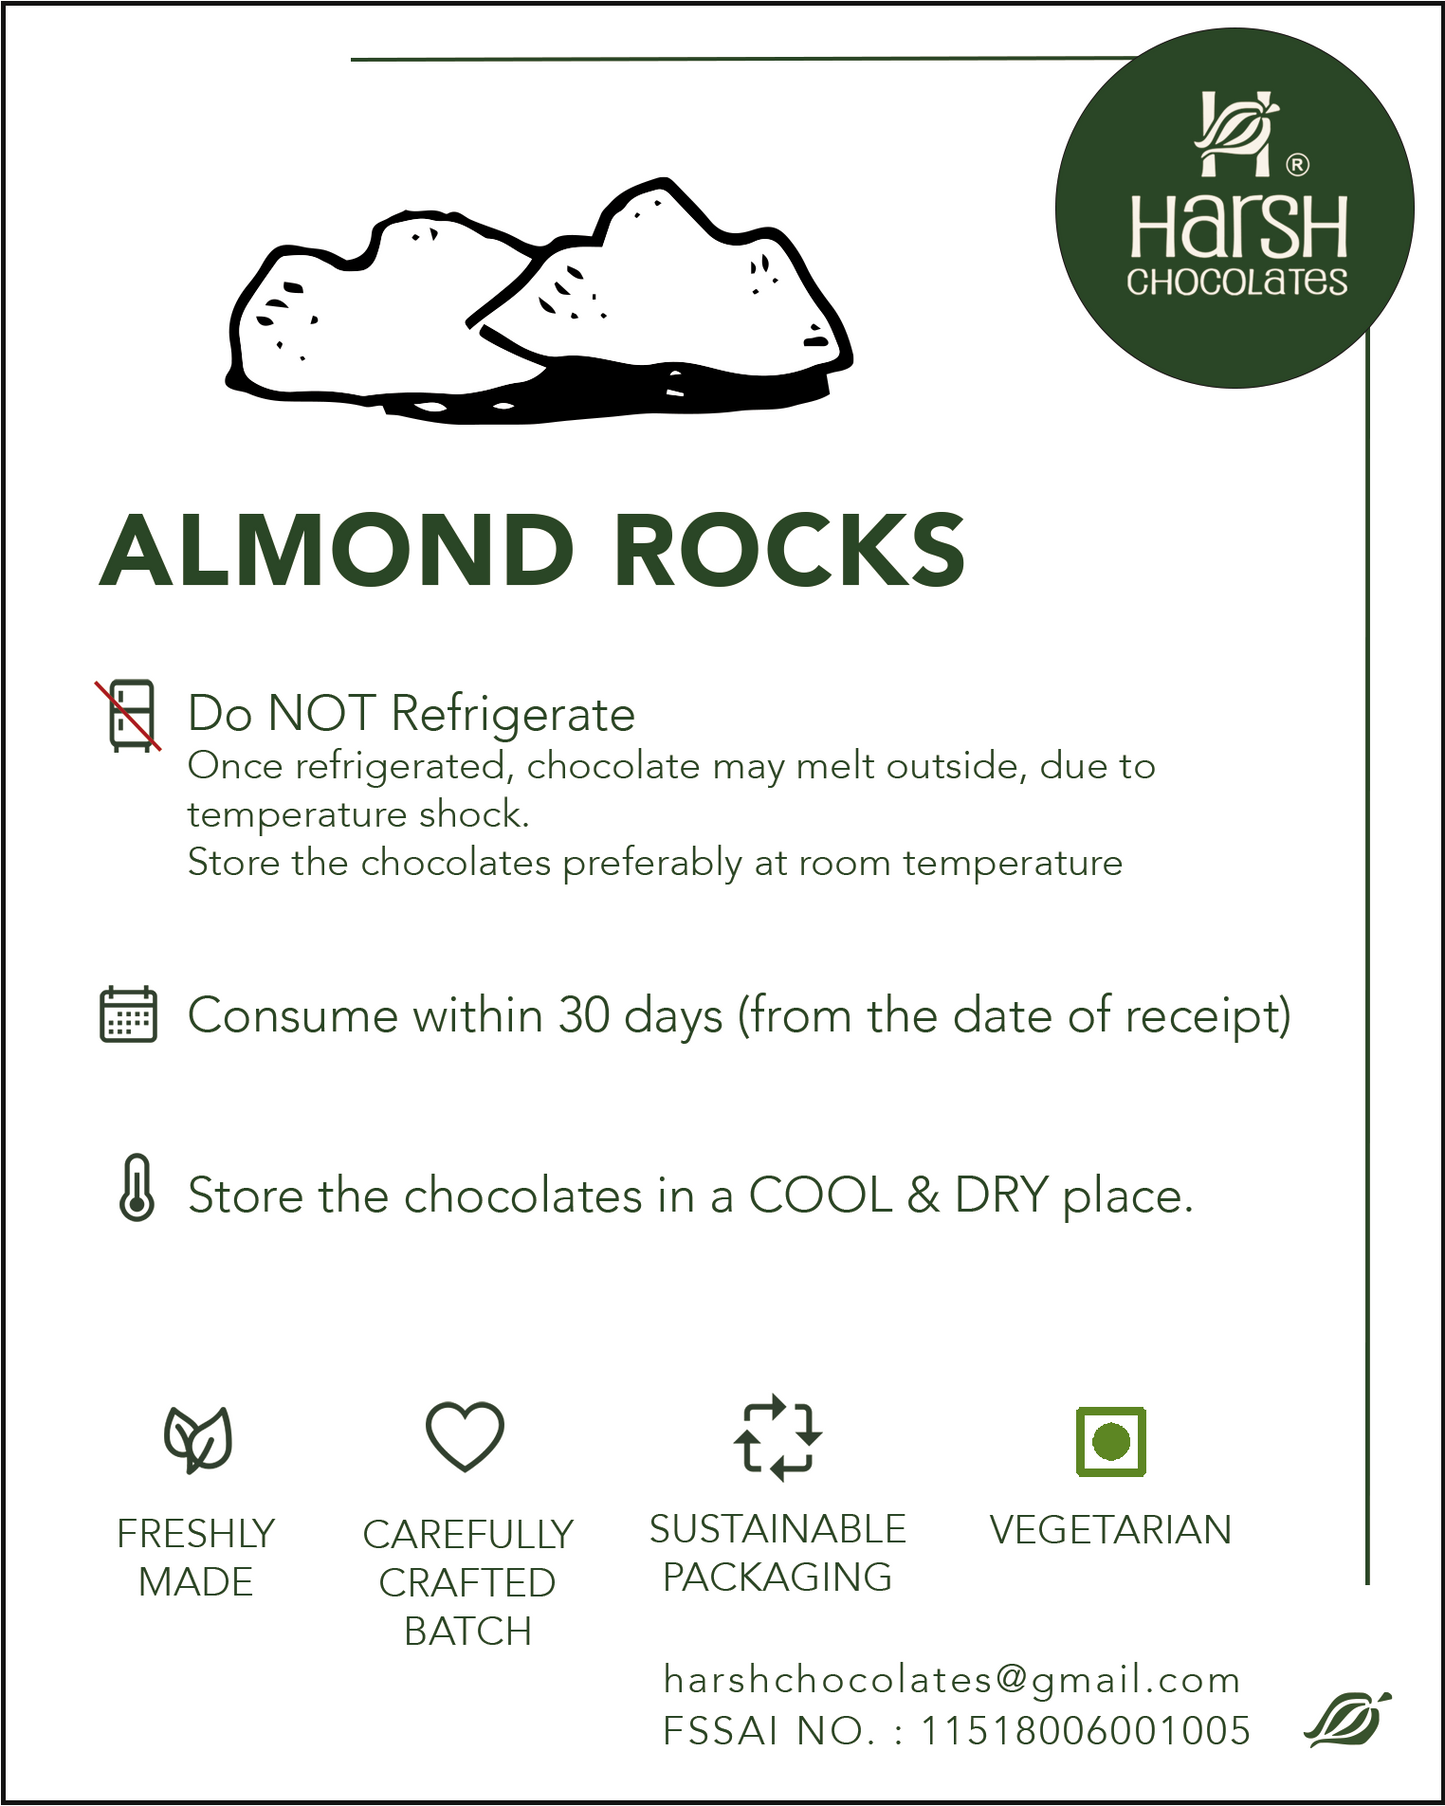 how should I store Almond rock chocolates